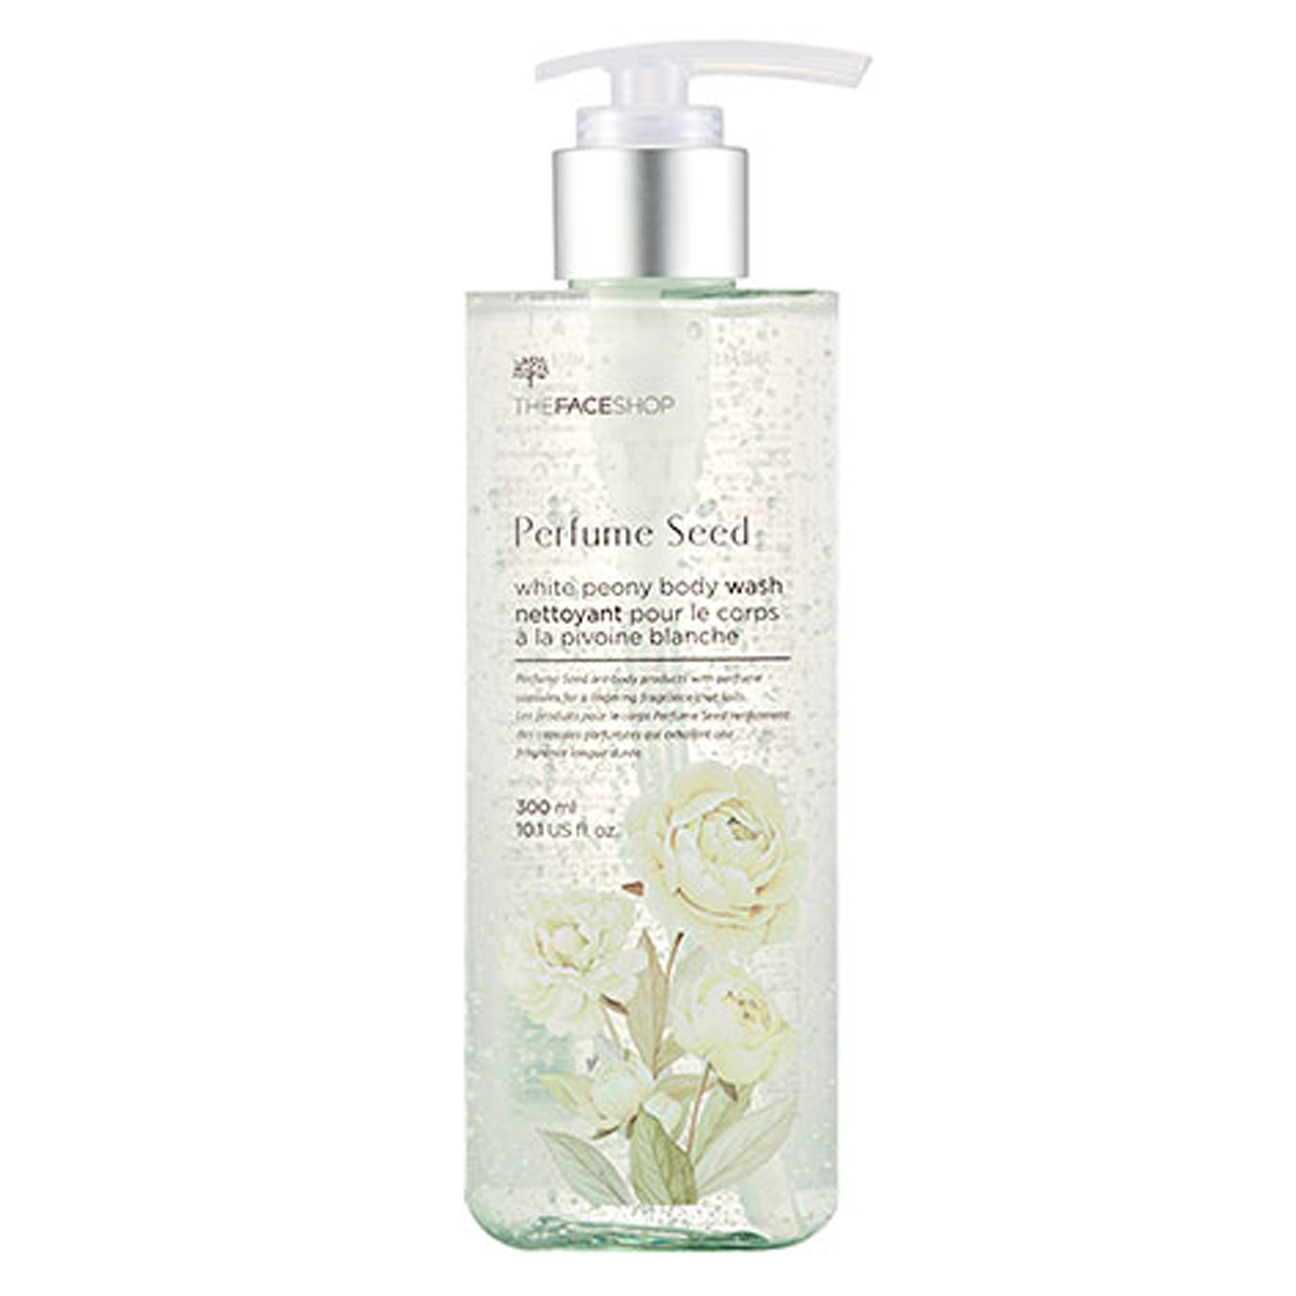 Sữa tắm Thefaceshop Perfumed Seed White peony Body Wash